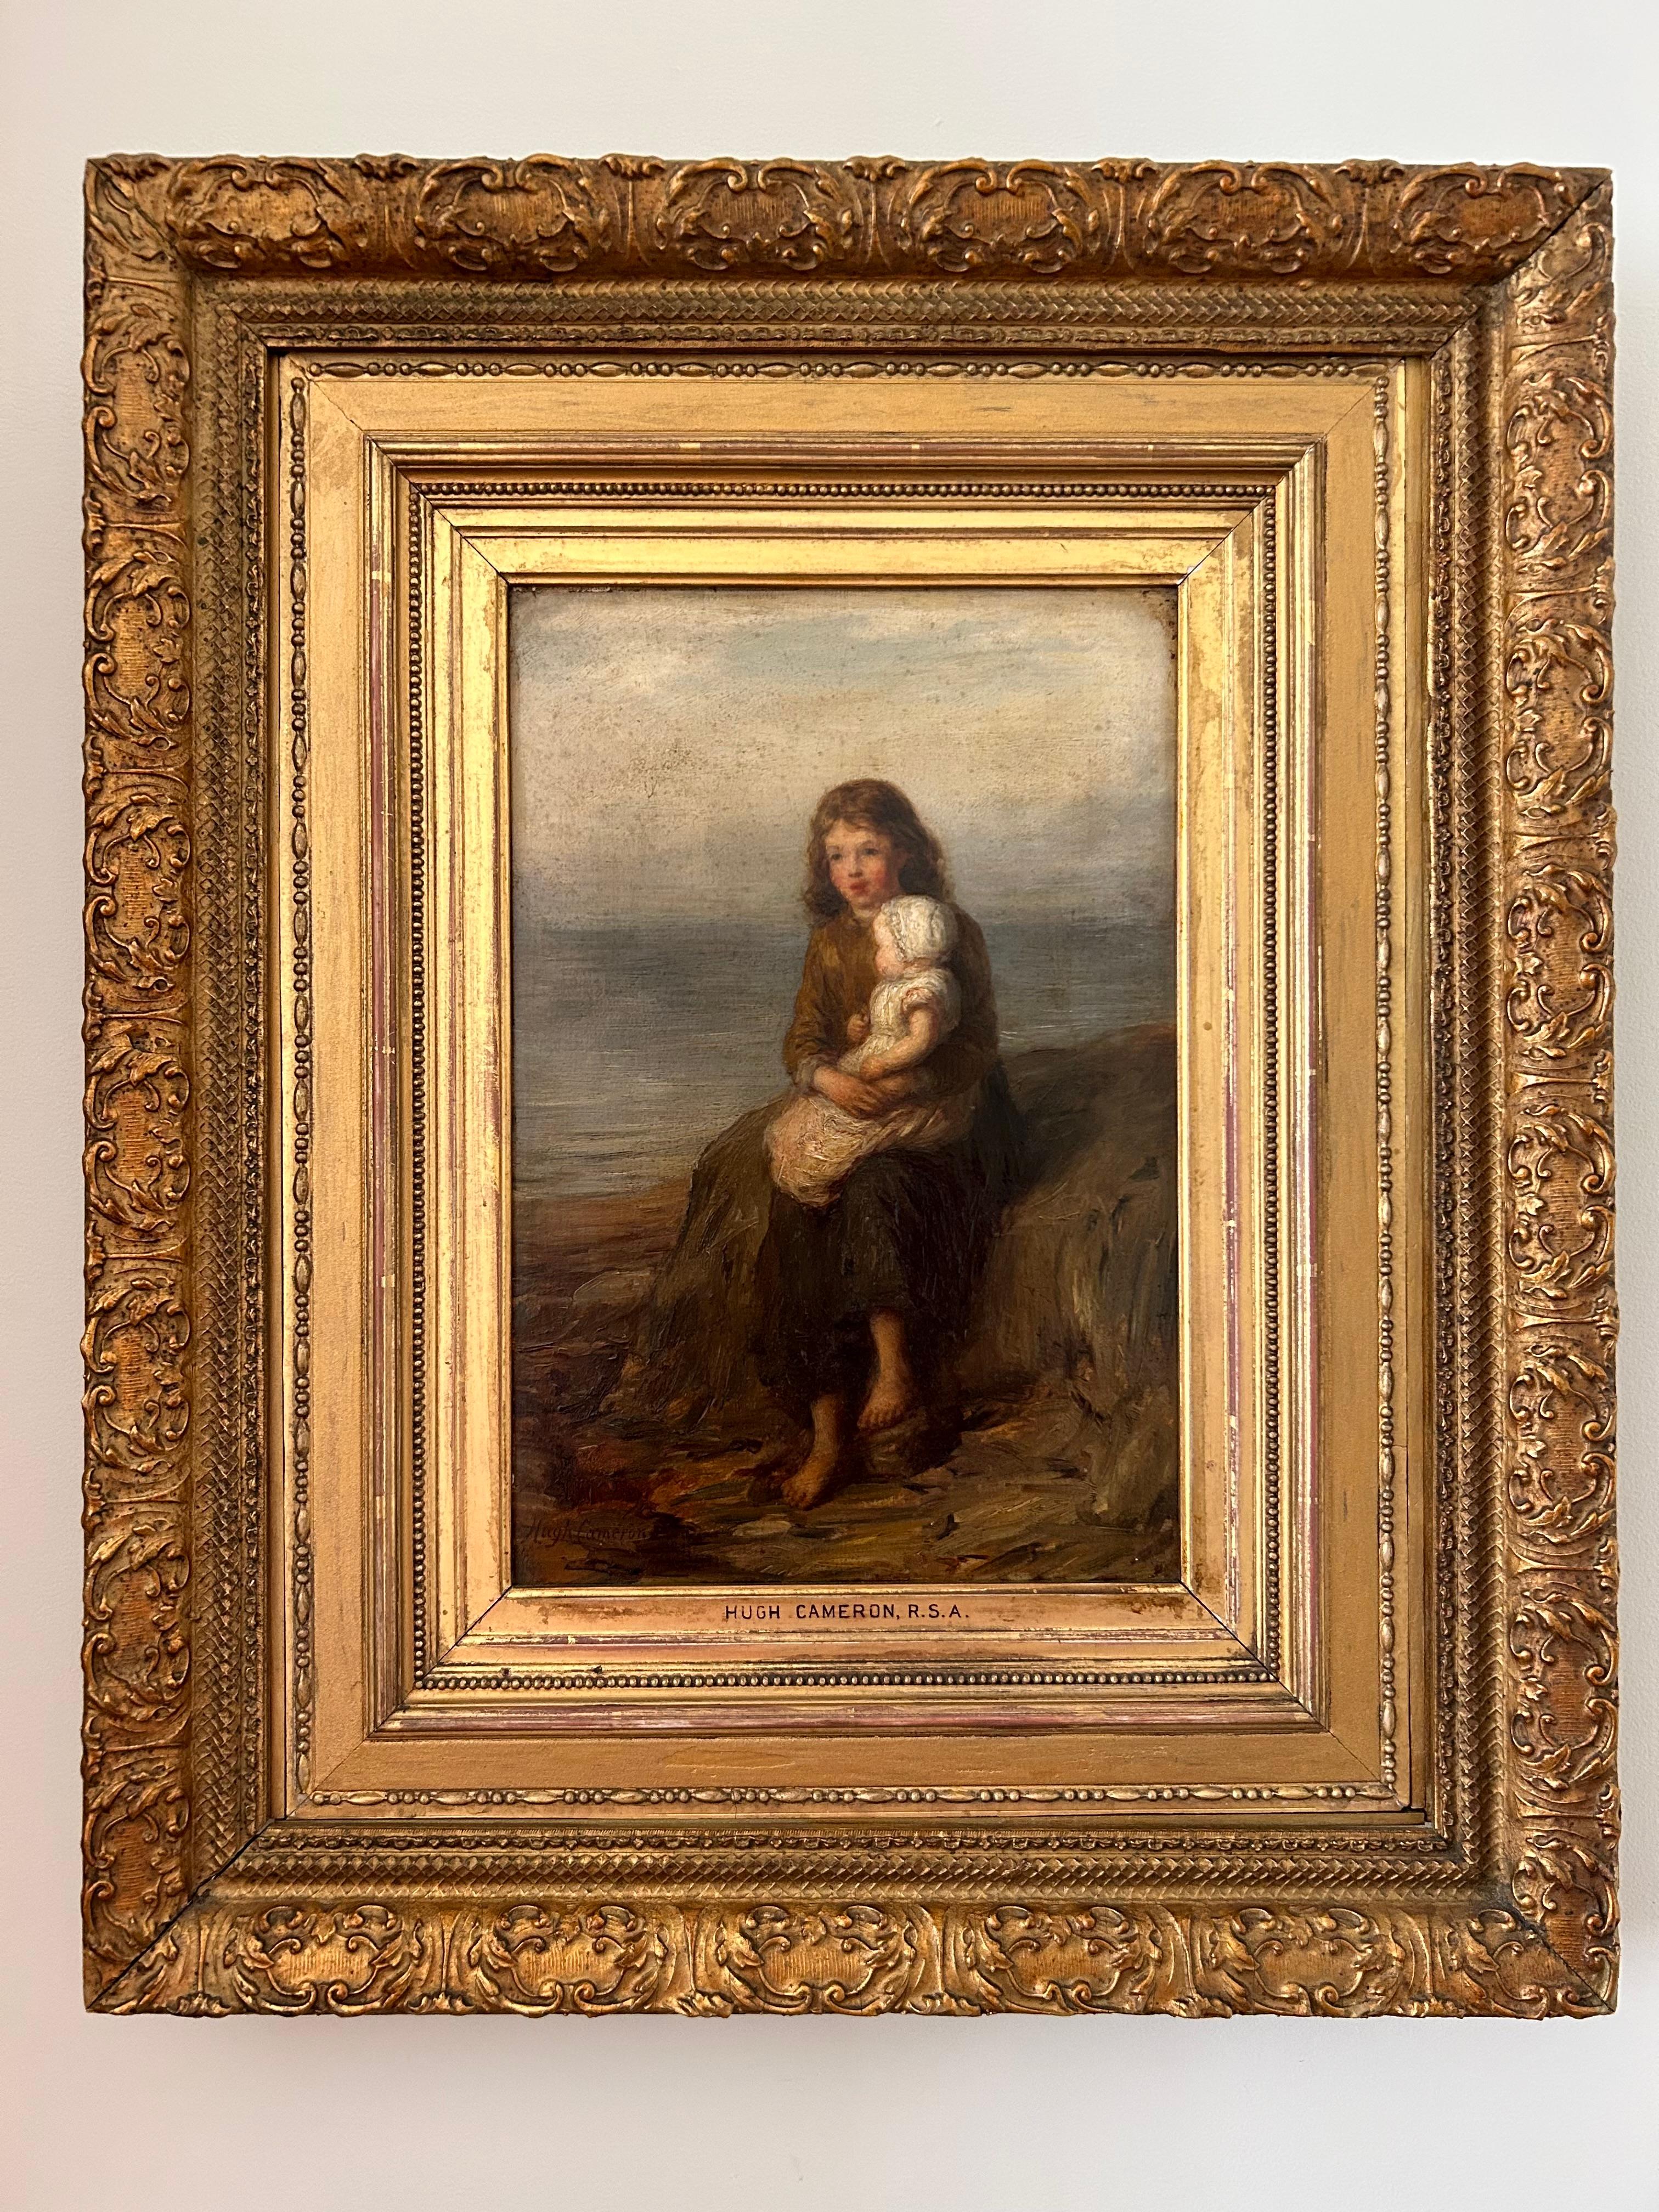 A beautiful oil on canvas by Scottish 19th century artist Hugh Cameron, RSA RSW, ROI (1835-1918), in an exquisite gilt frame. This painting is a particularly moving and wistful example of Cameron's work. Cameron was renowned for his fine figurative